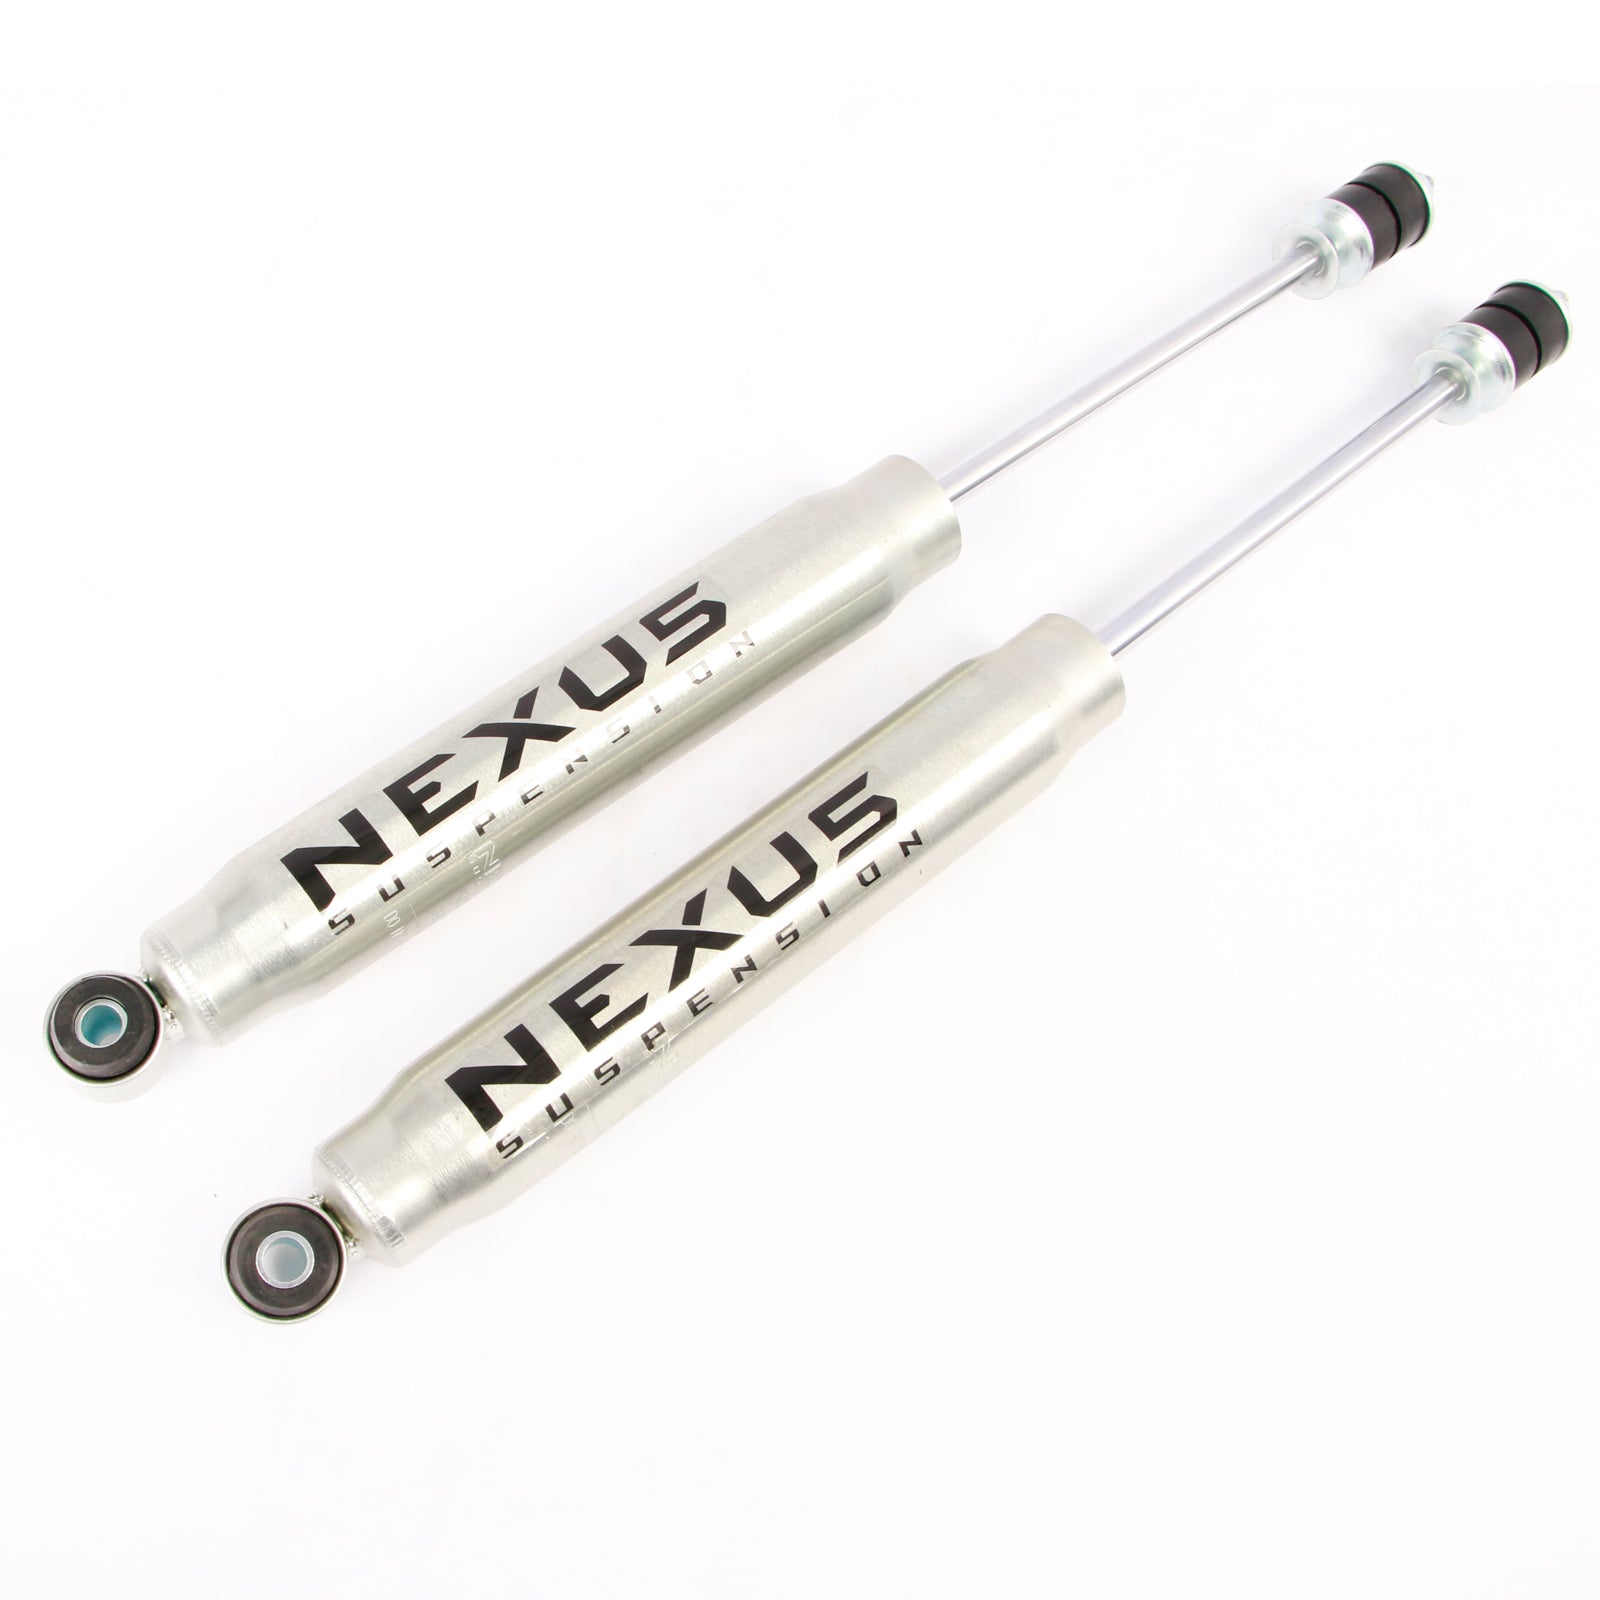 NEXUS SUSPENSION Rear Shock Absorber Fit Toyota 4Runner 2003-2022 about 0-3